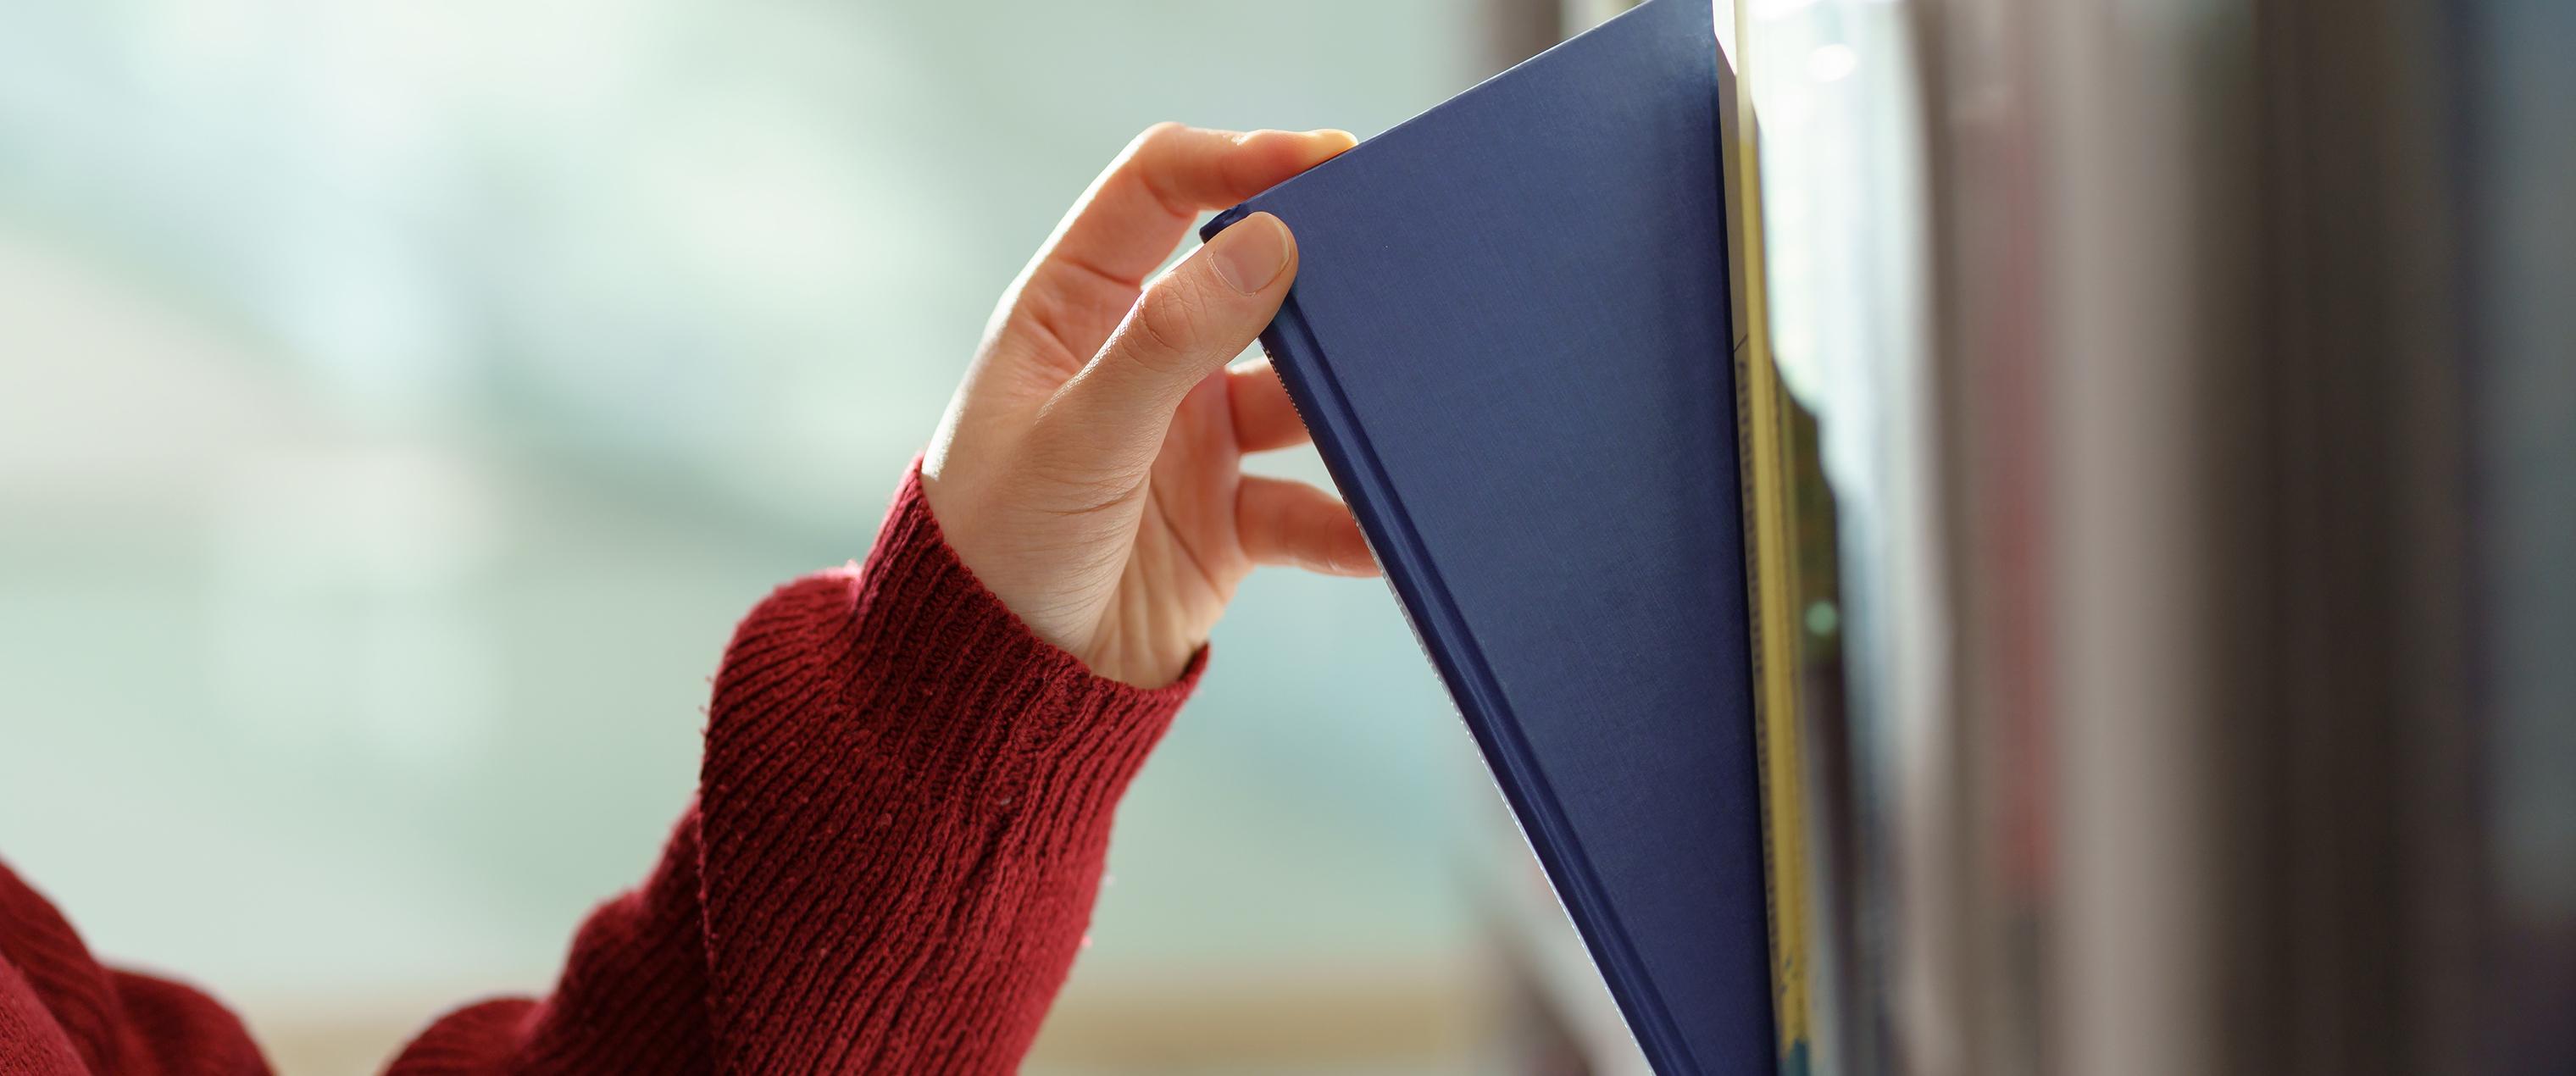 Woman reaching for a book in the library